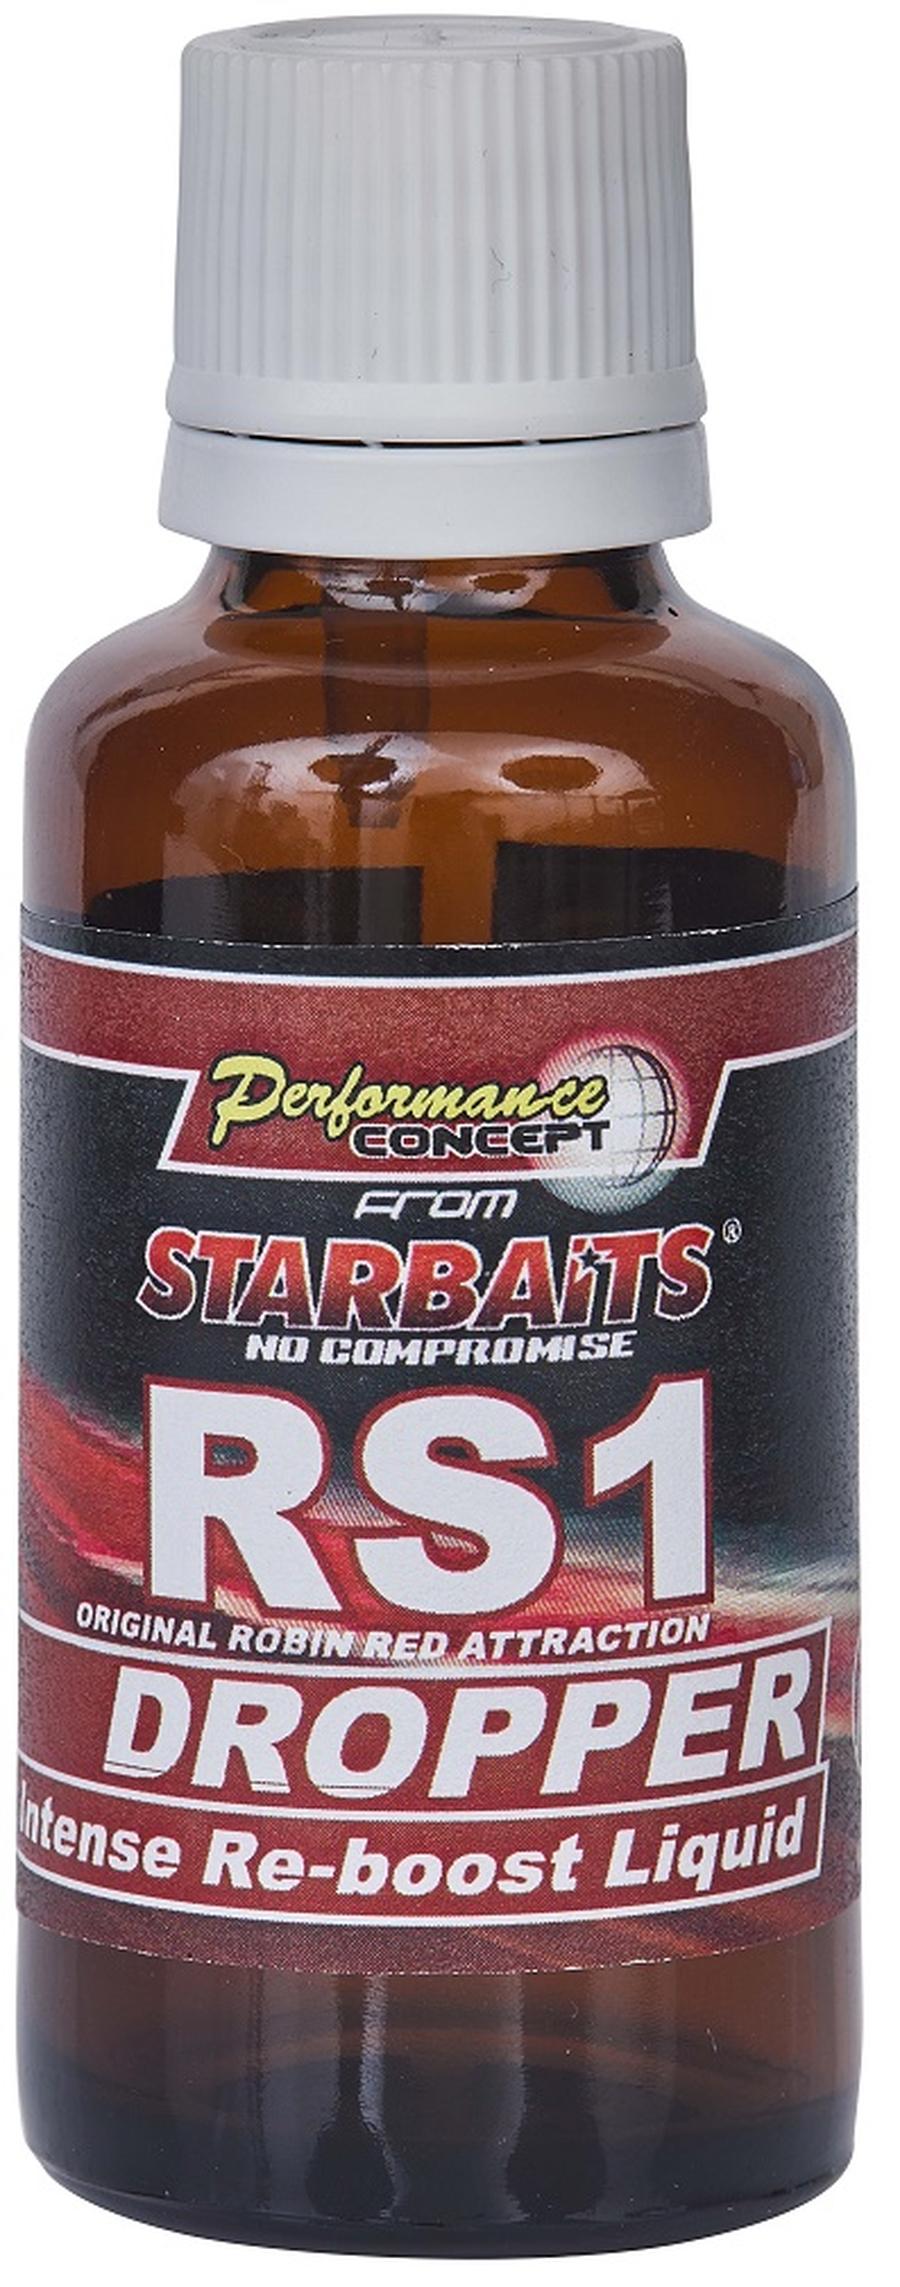 Starbaits esence concept dropper 30 ml-rs1